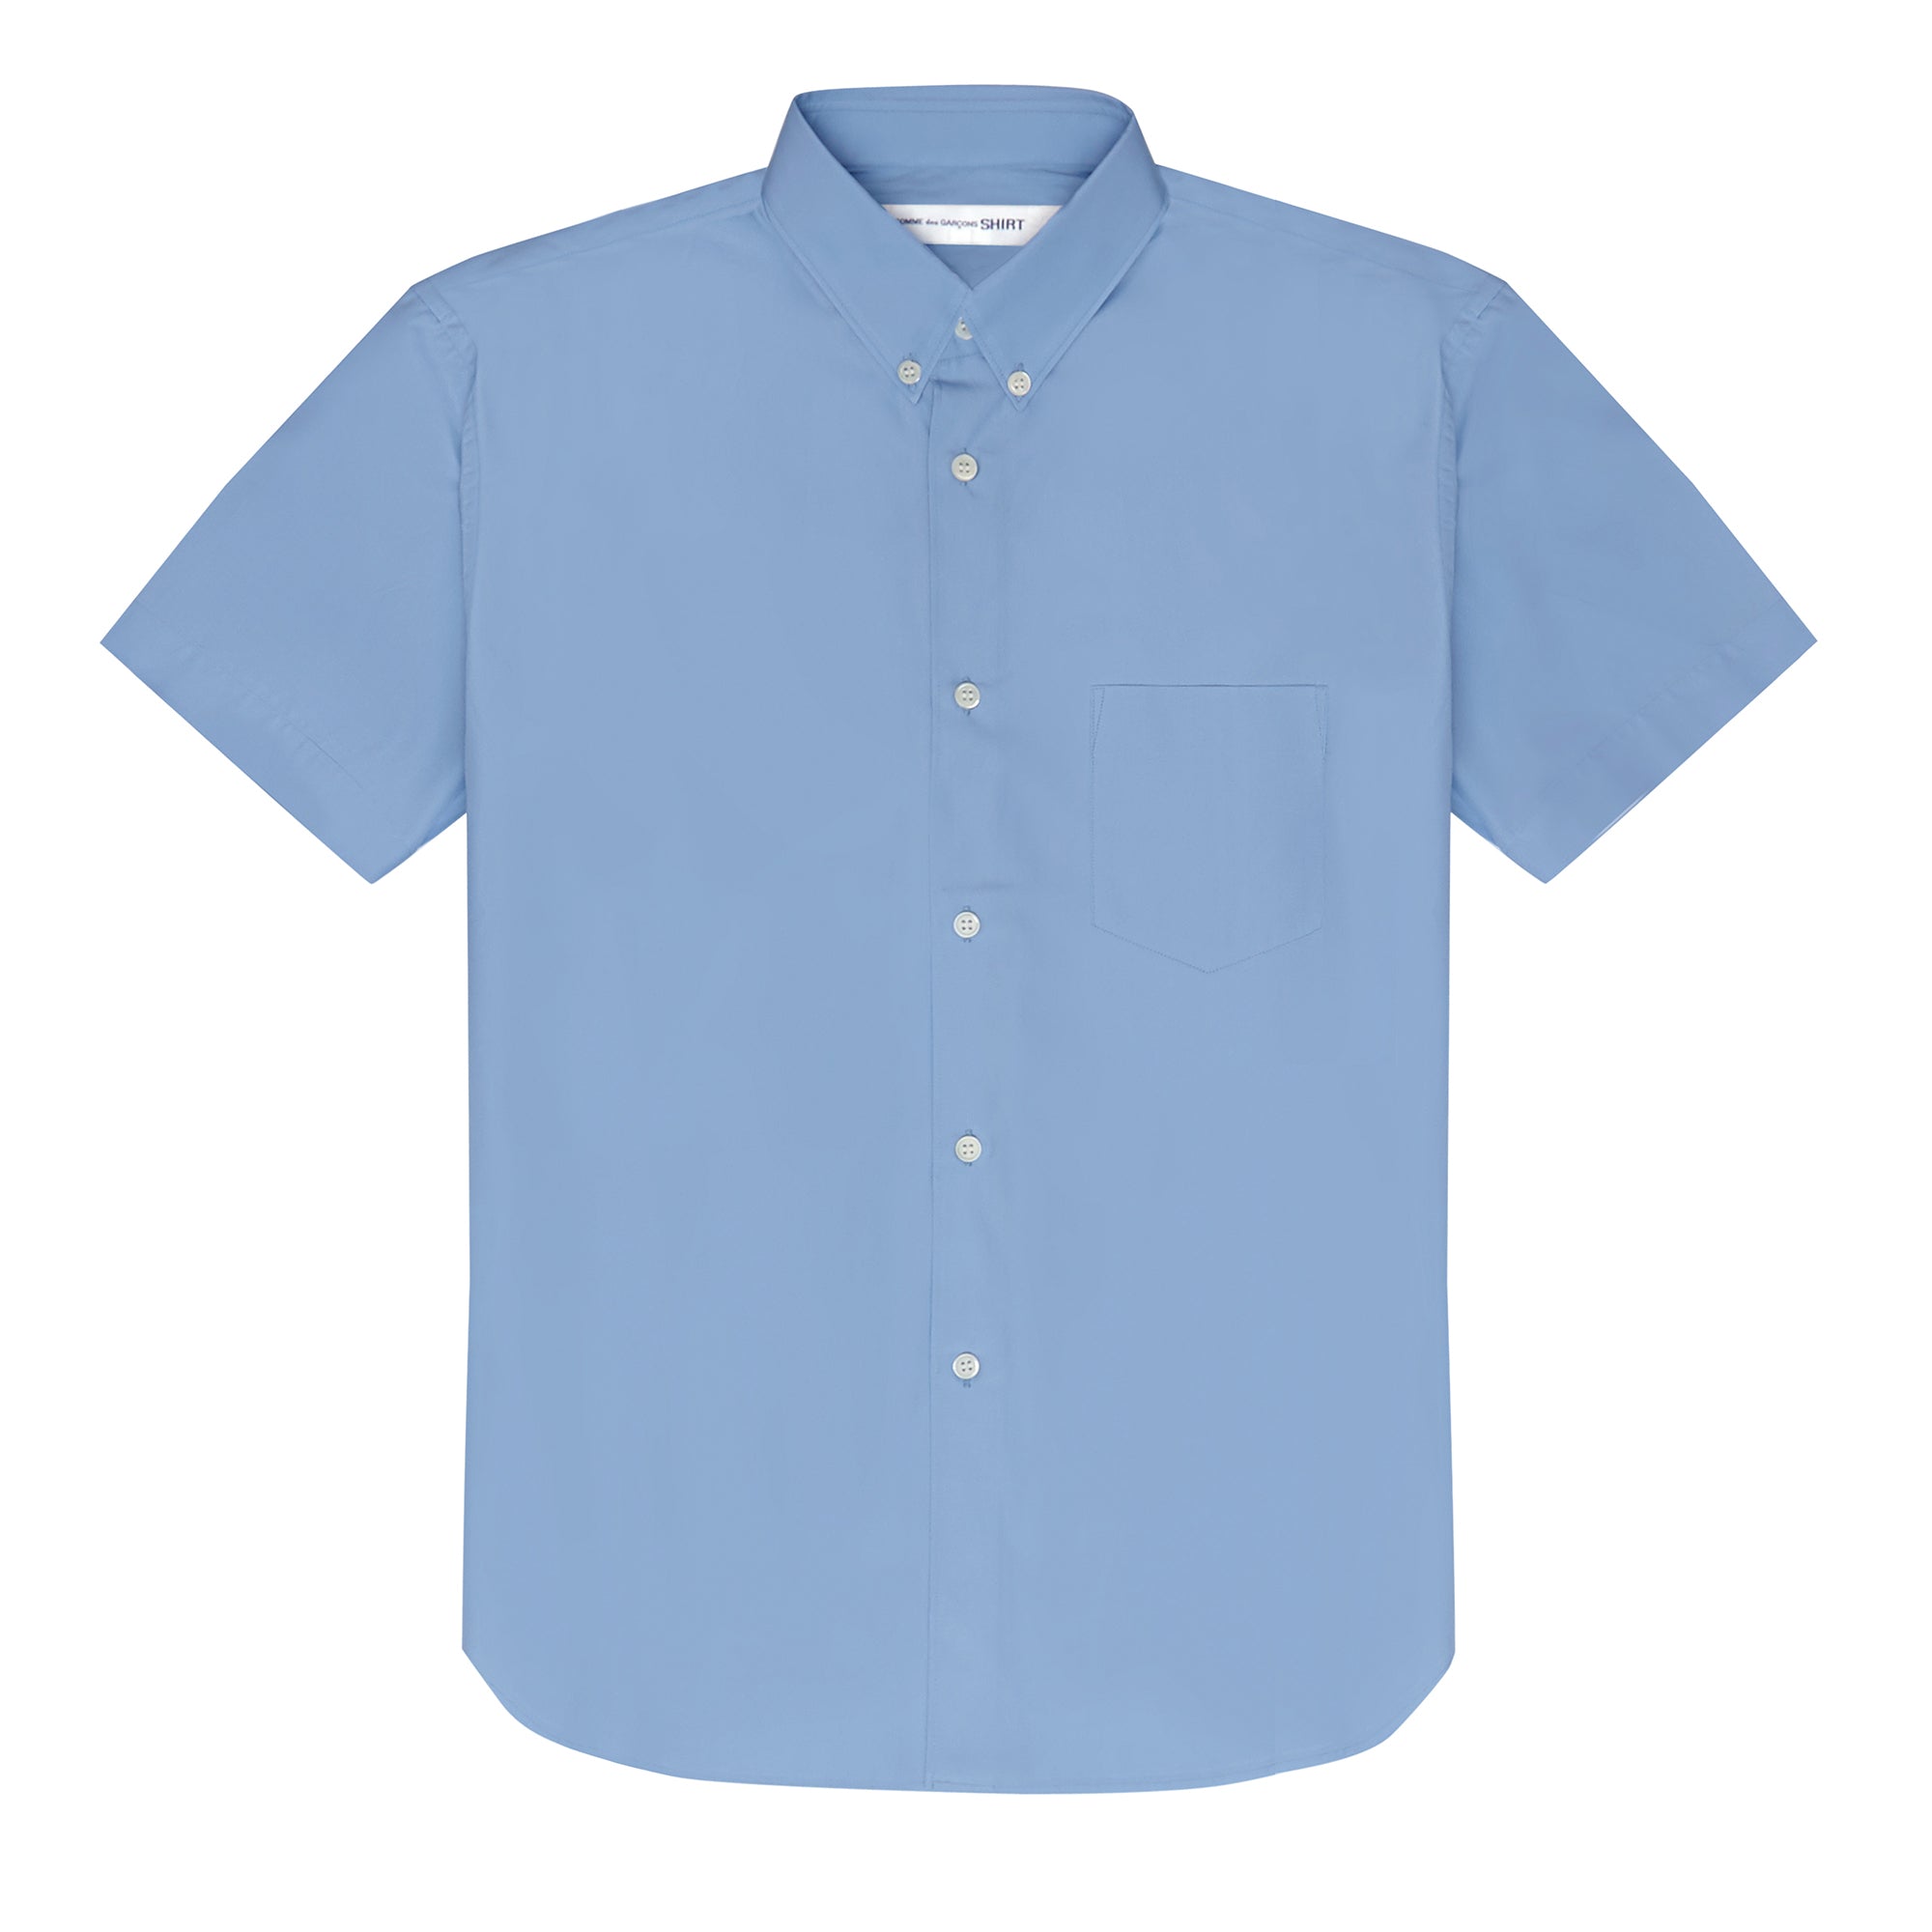 CDG SHIRT FOREVER - Button down oxford Cotton S/S Shirt CDGS8PLC - (Blue) view 1